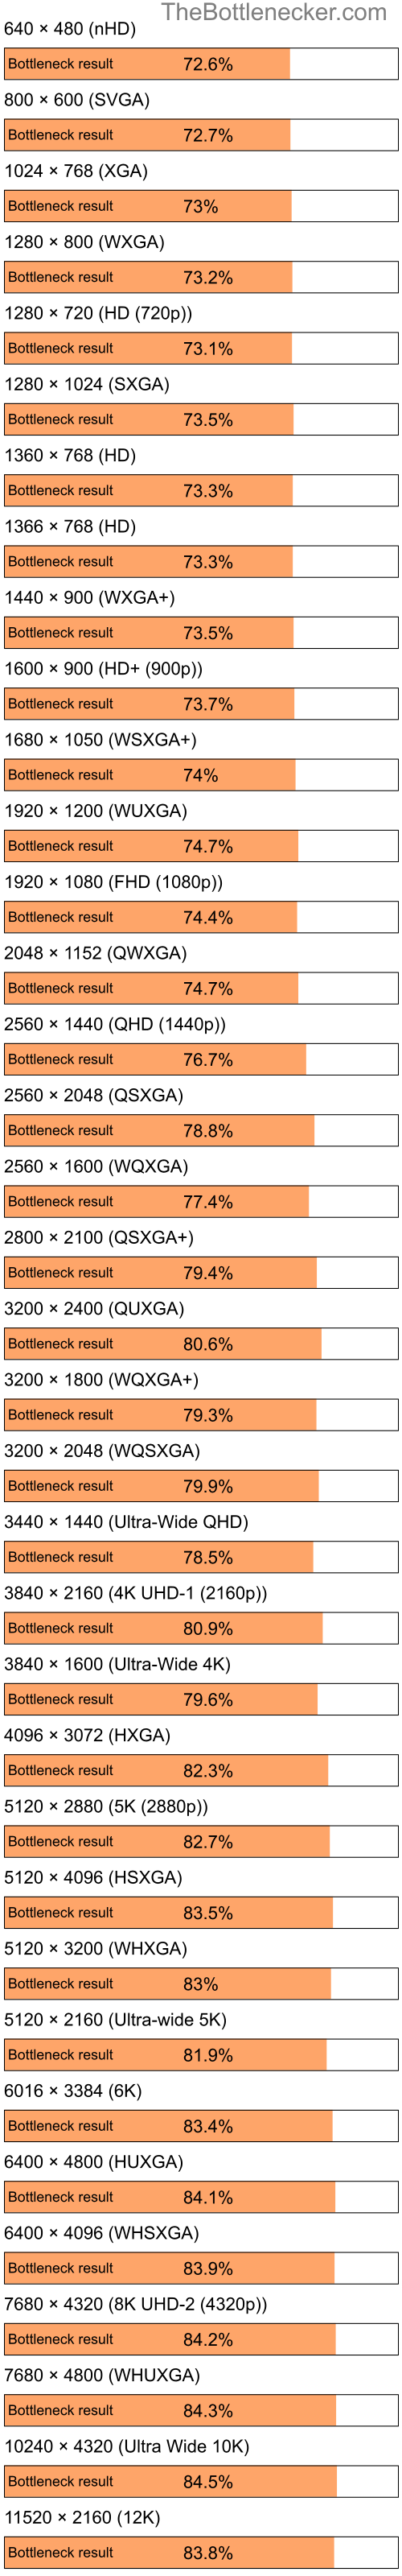 Bottleneck results by resolution for Intel Celeron M and AMD Mobility Radeon X2300 in General Tasks